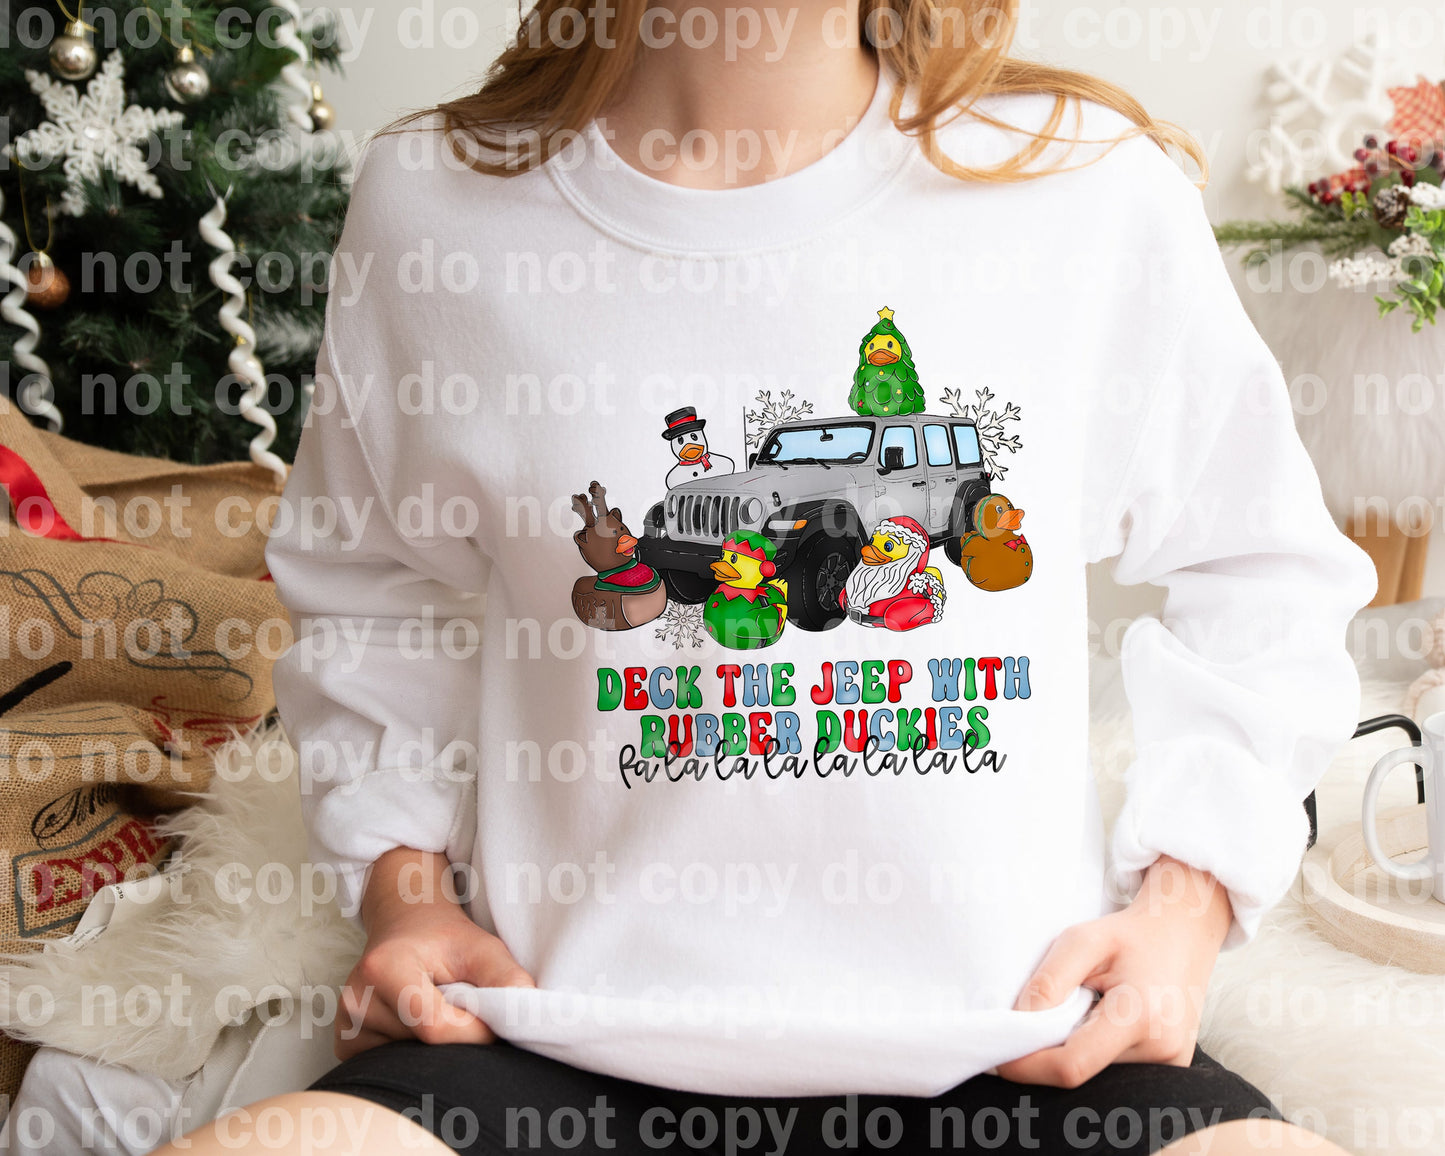 Deck The Jeep With Rubber Duckies Silver Dream Print or Sublimation Print